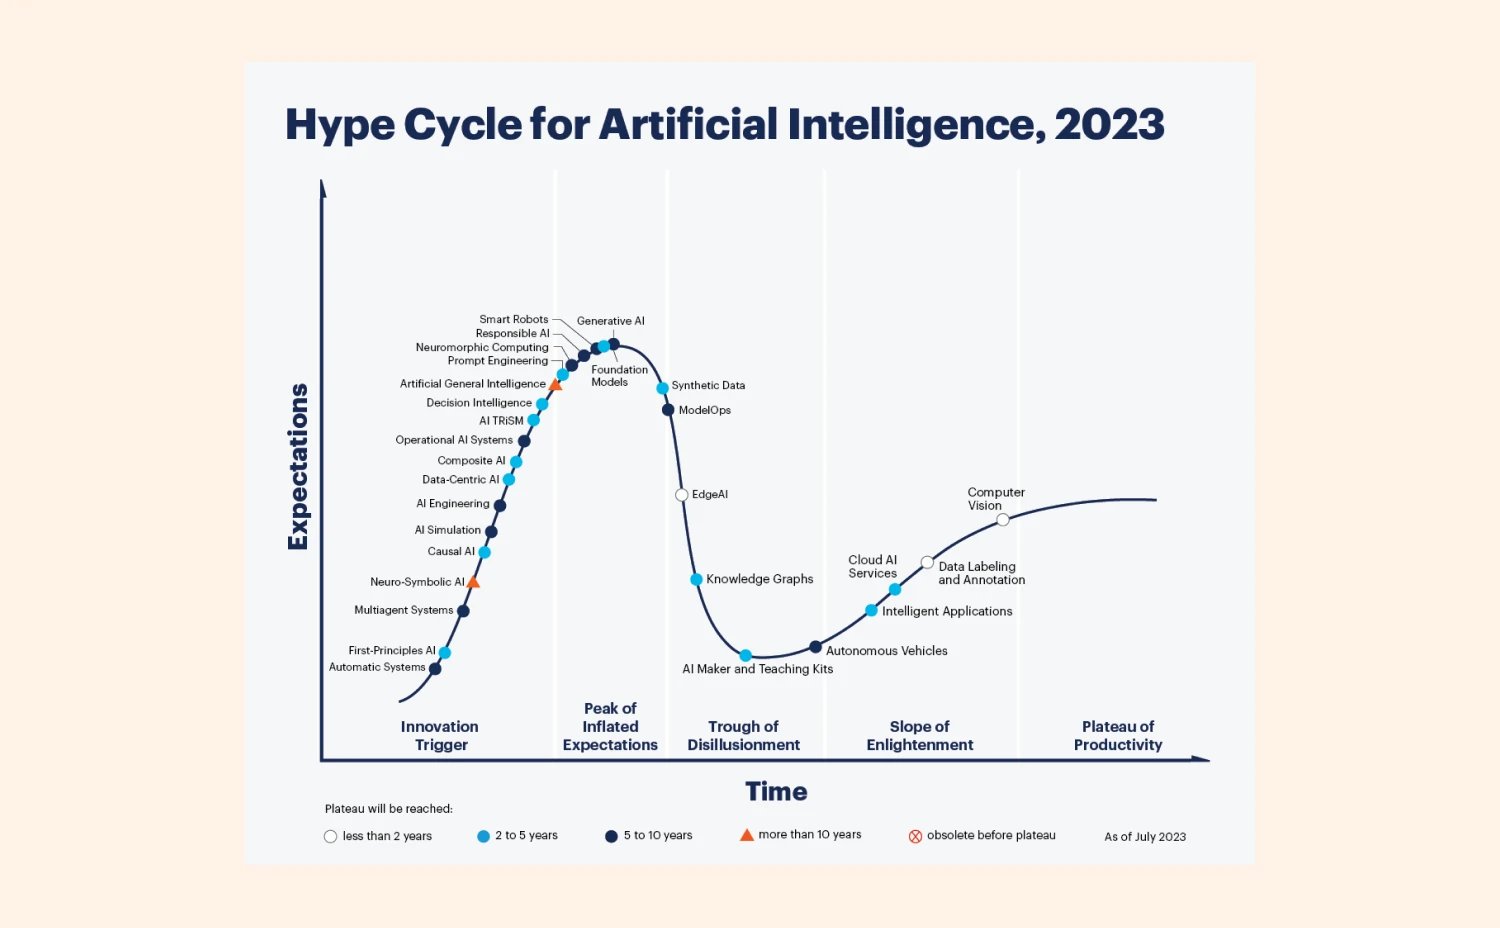 Hype cycle for AI, 2023